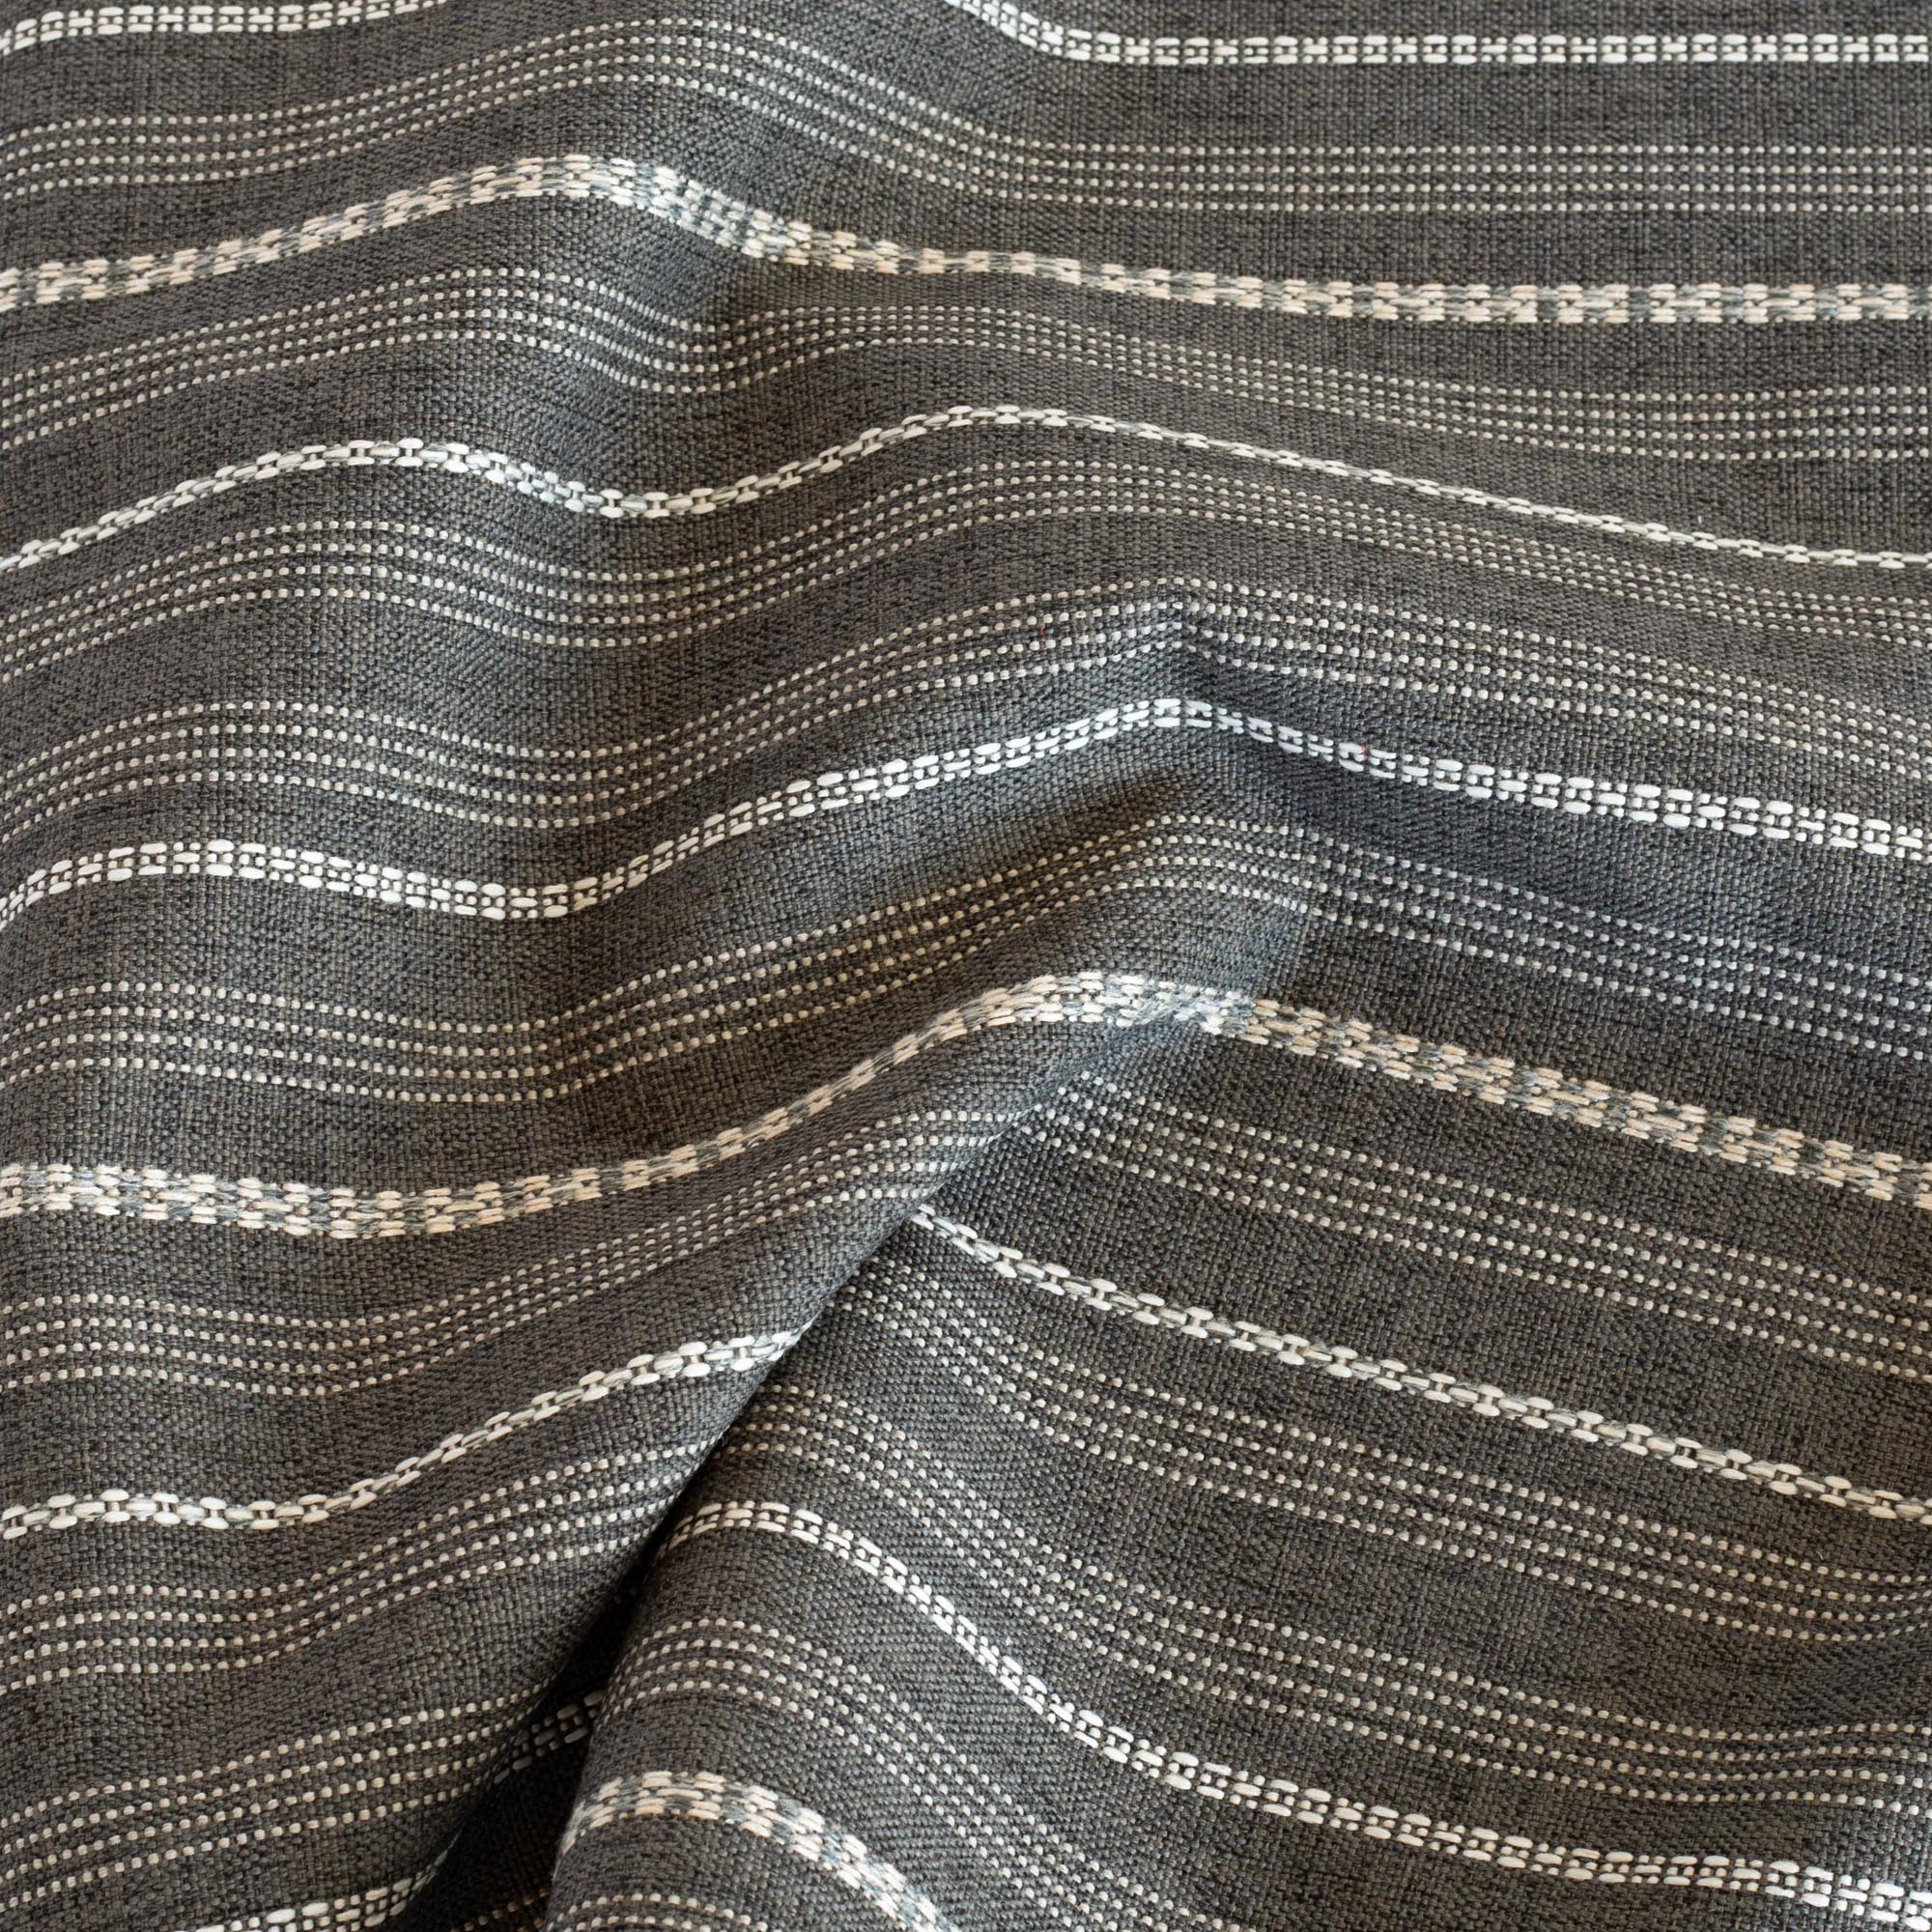 Thin Striped Fabric in Silver Grey and Charcoal